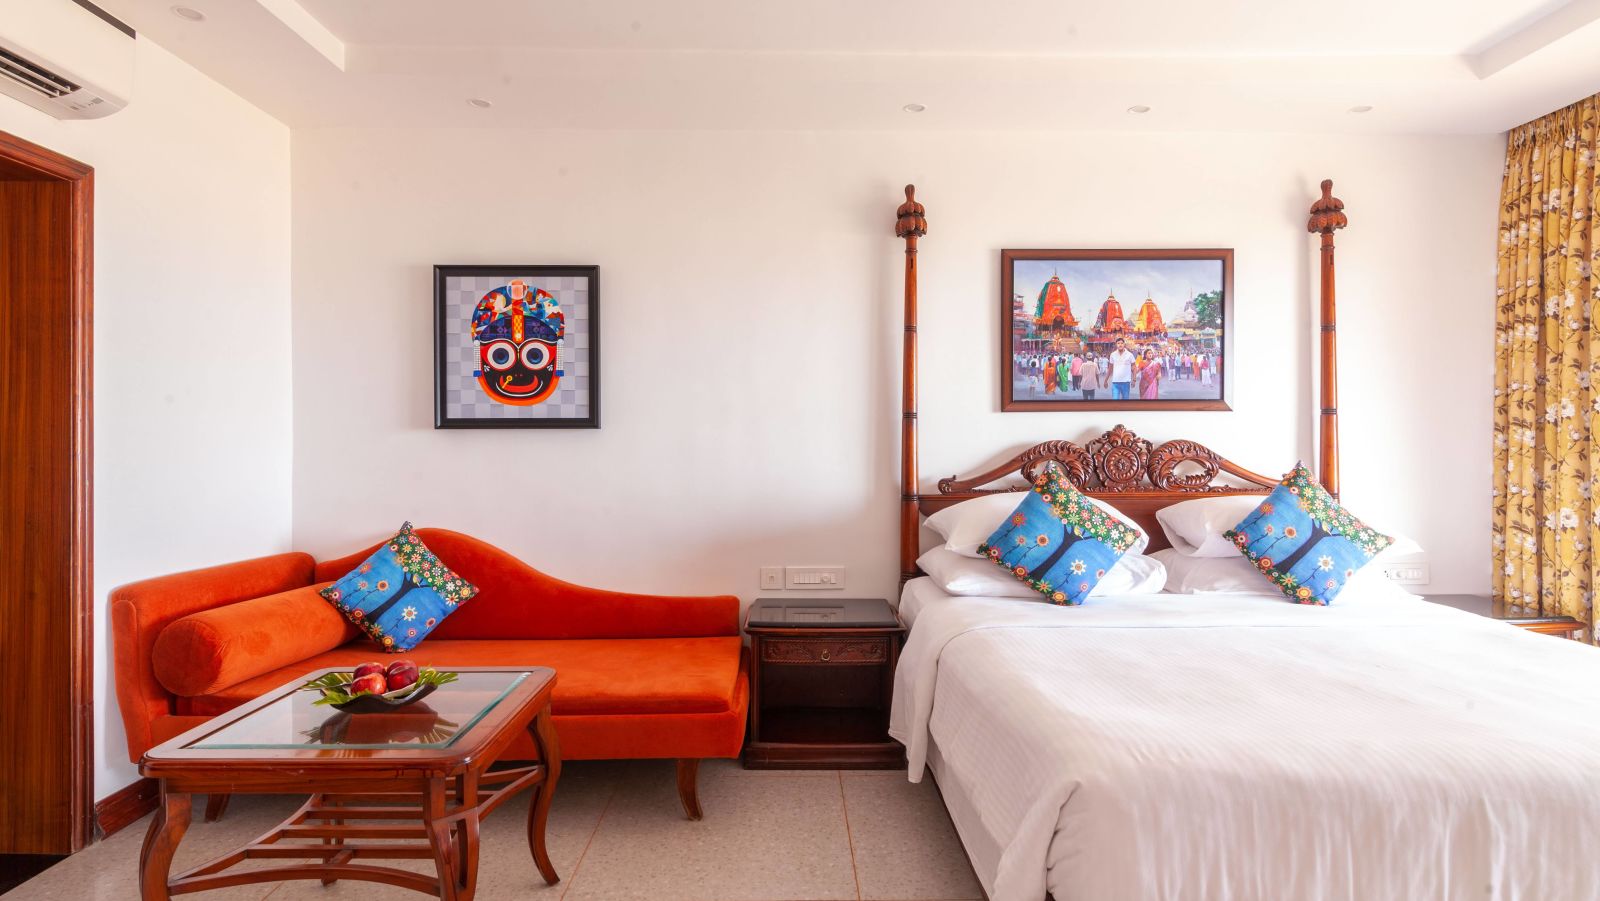 view of the bed - Mayfair Heritage, Puri 1